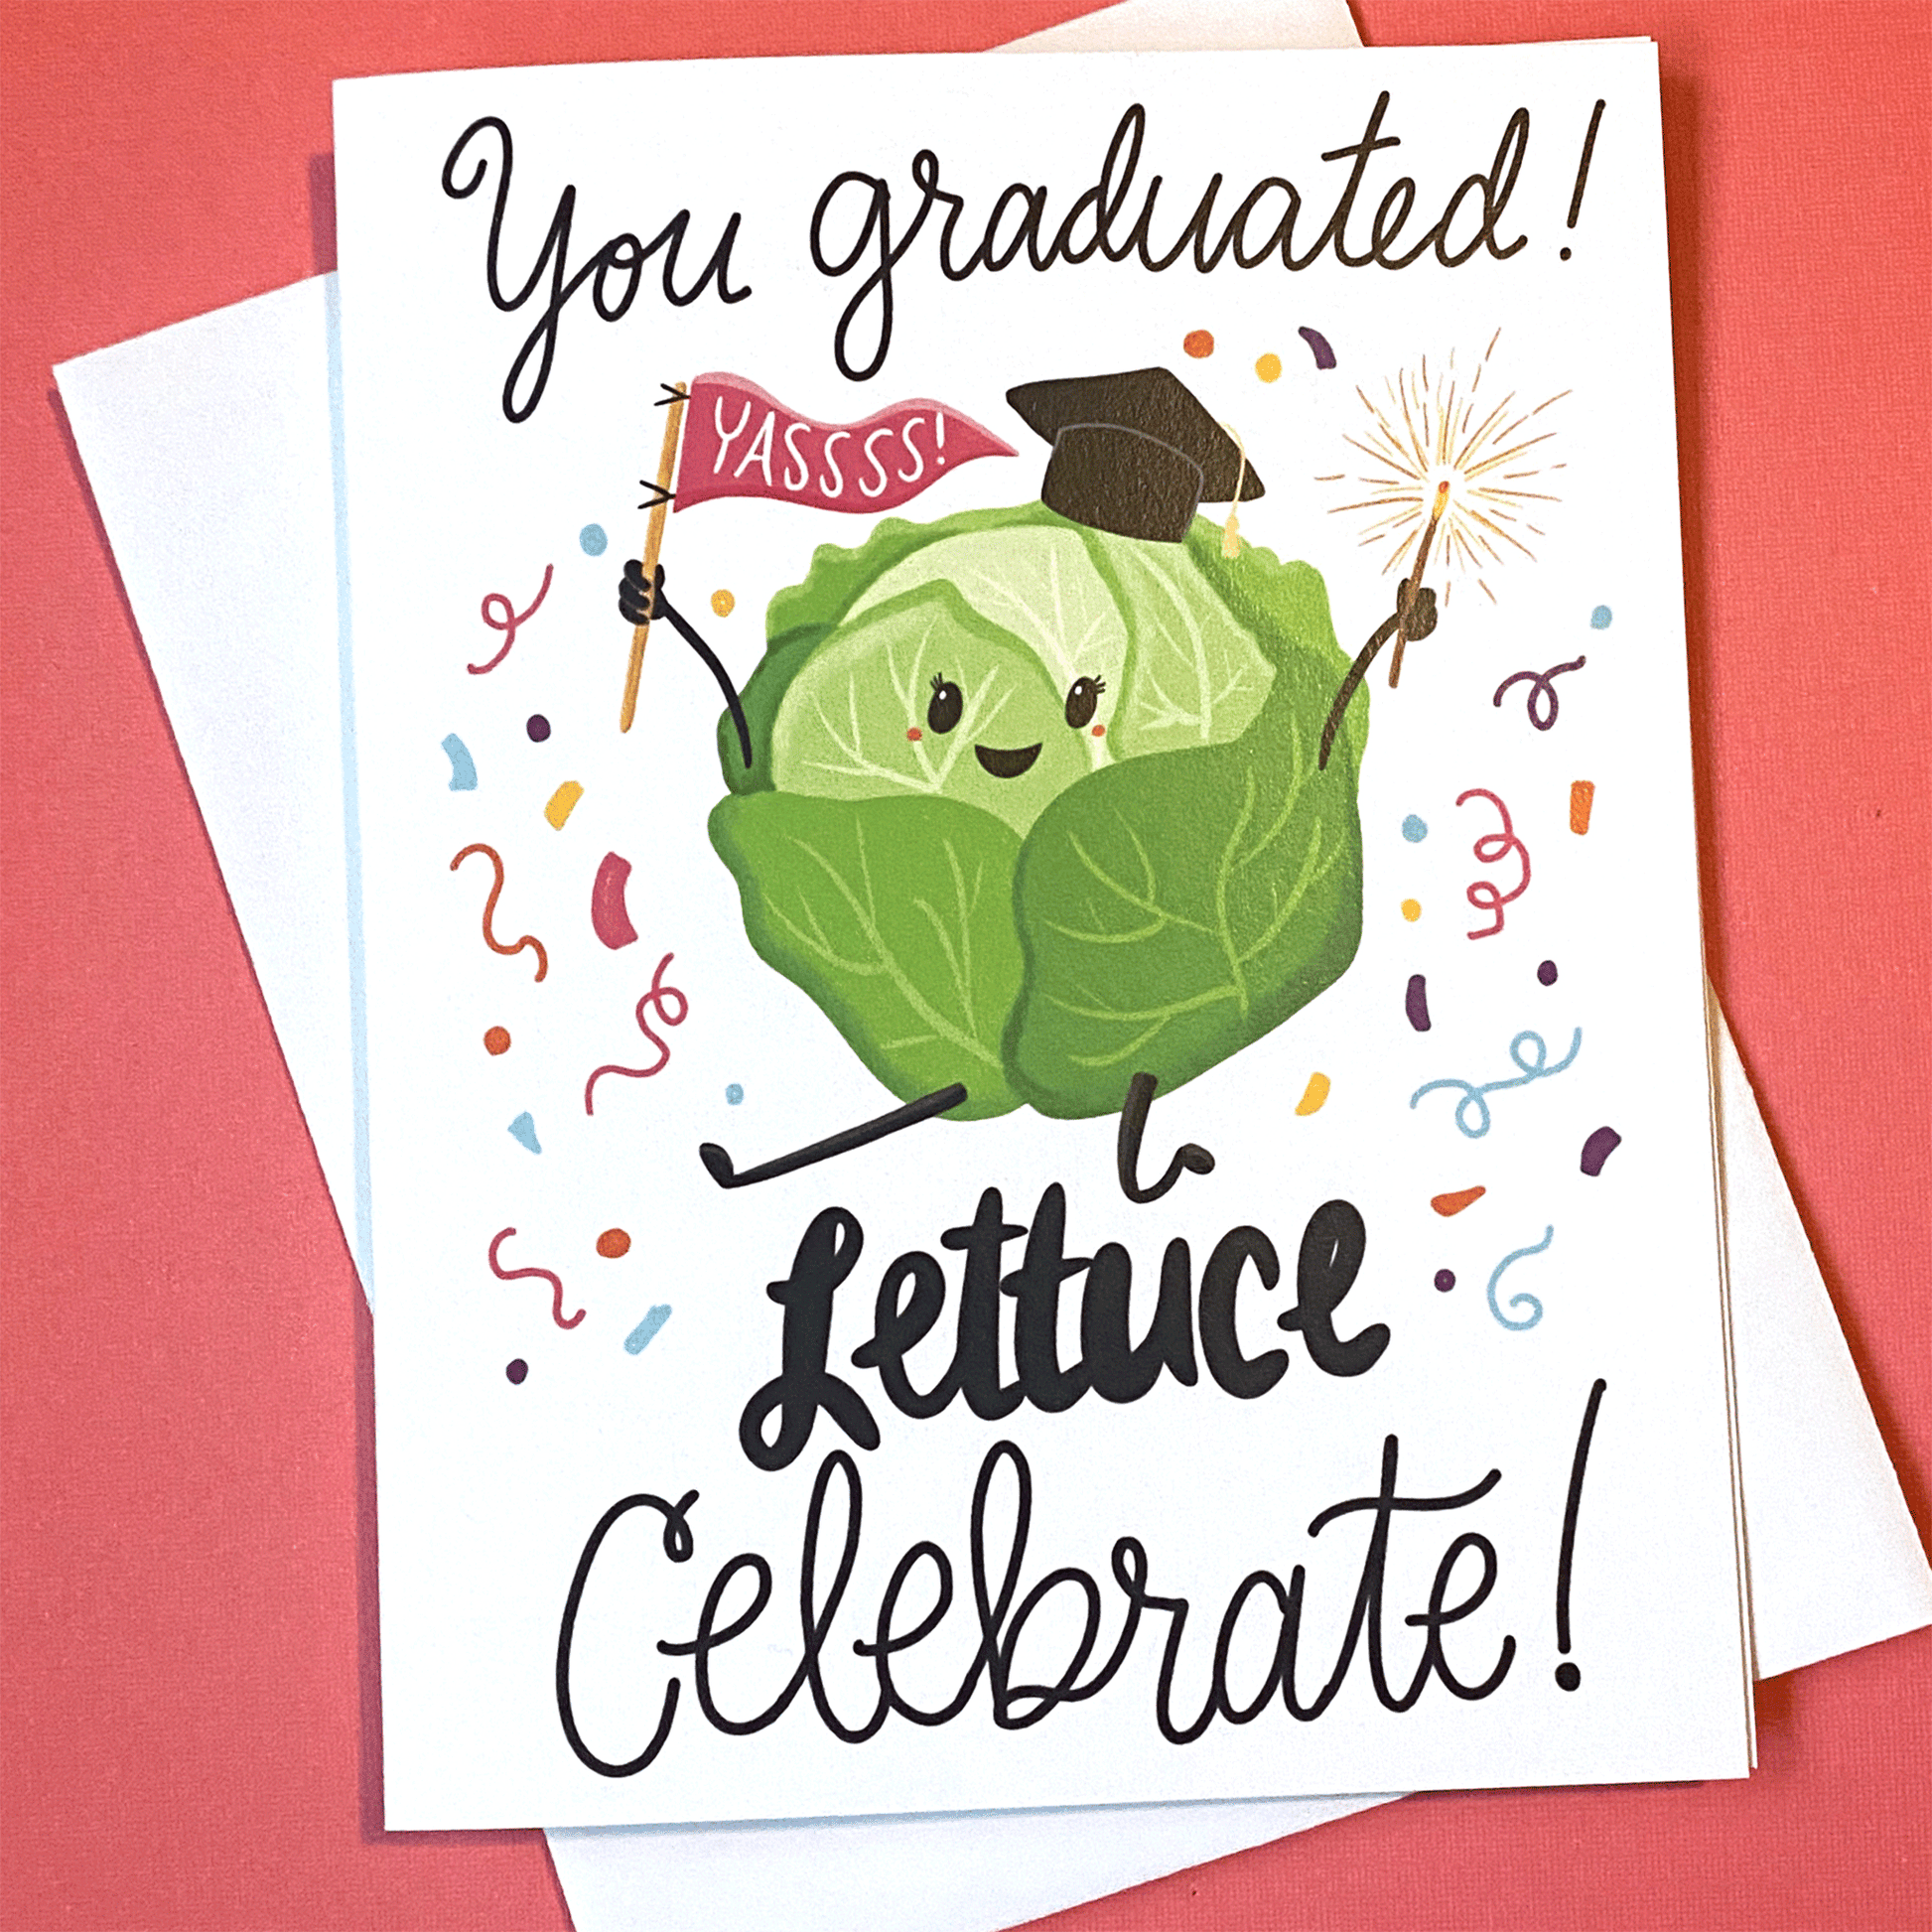 the card reads you graduated lettuce celebrate. There is a head of lettuce wearing a grad hat